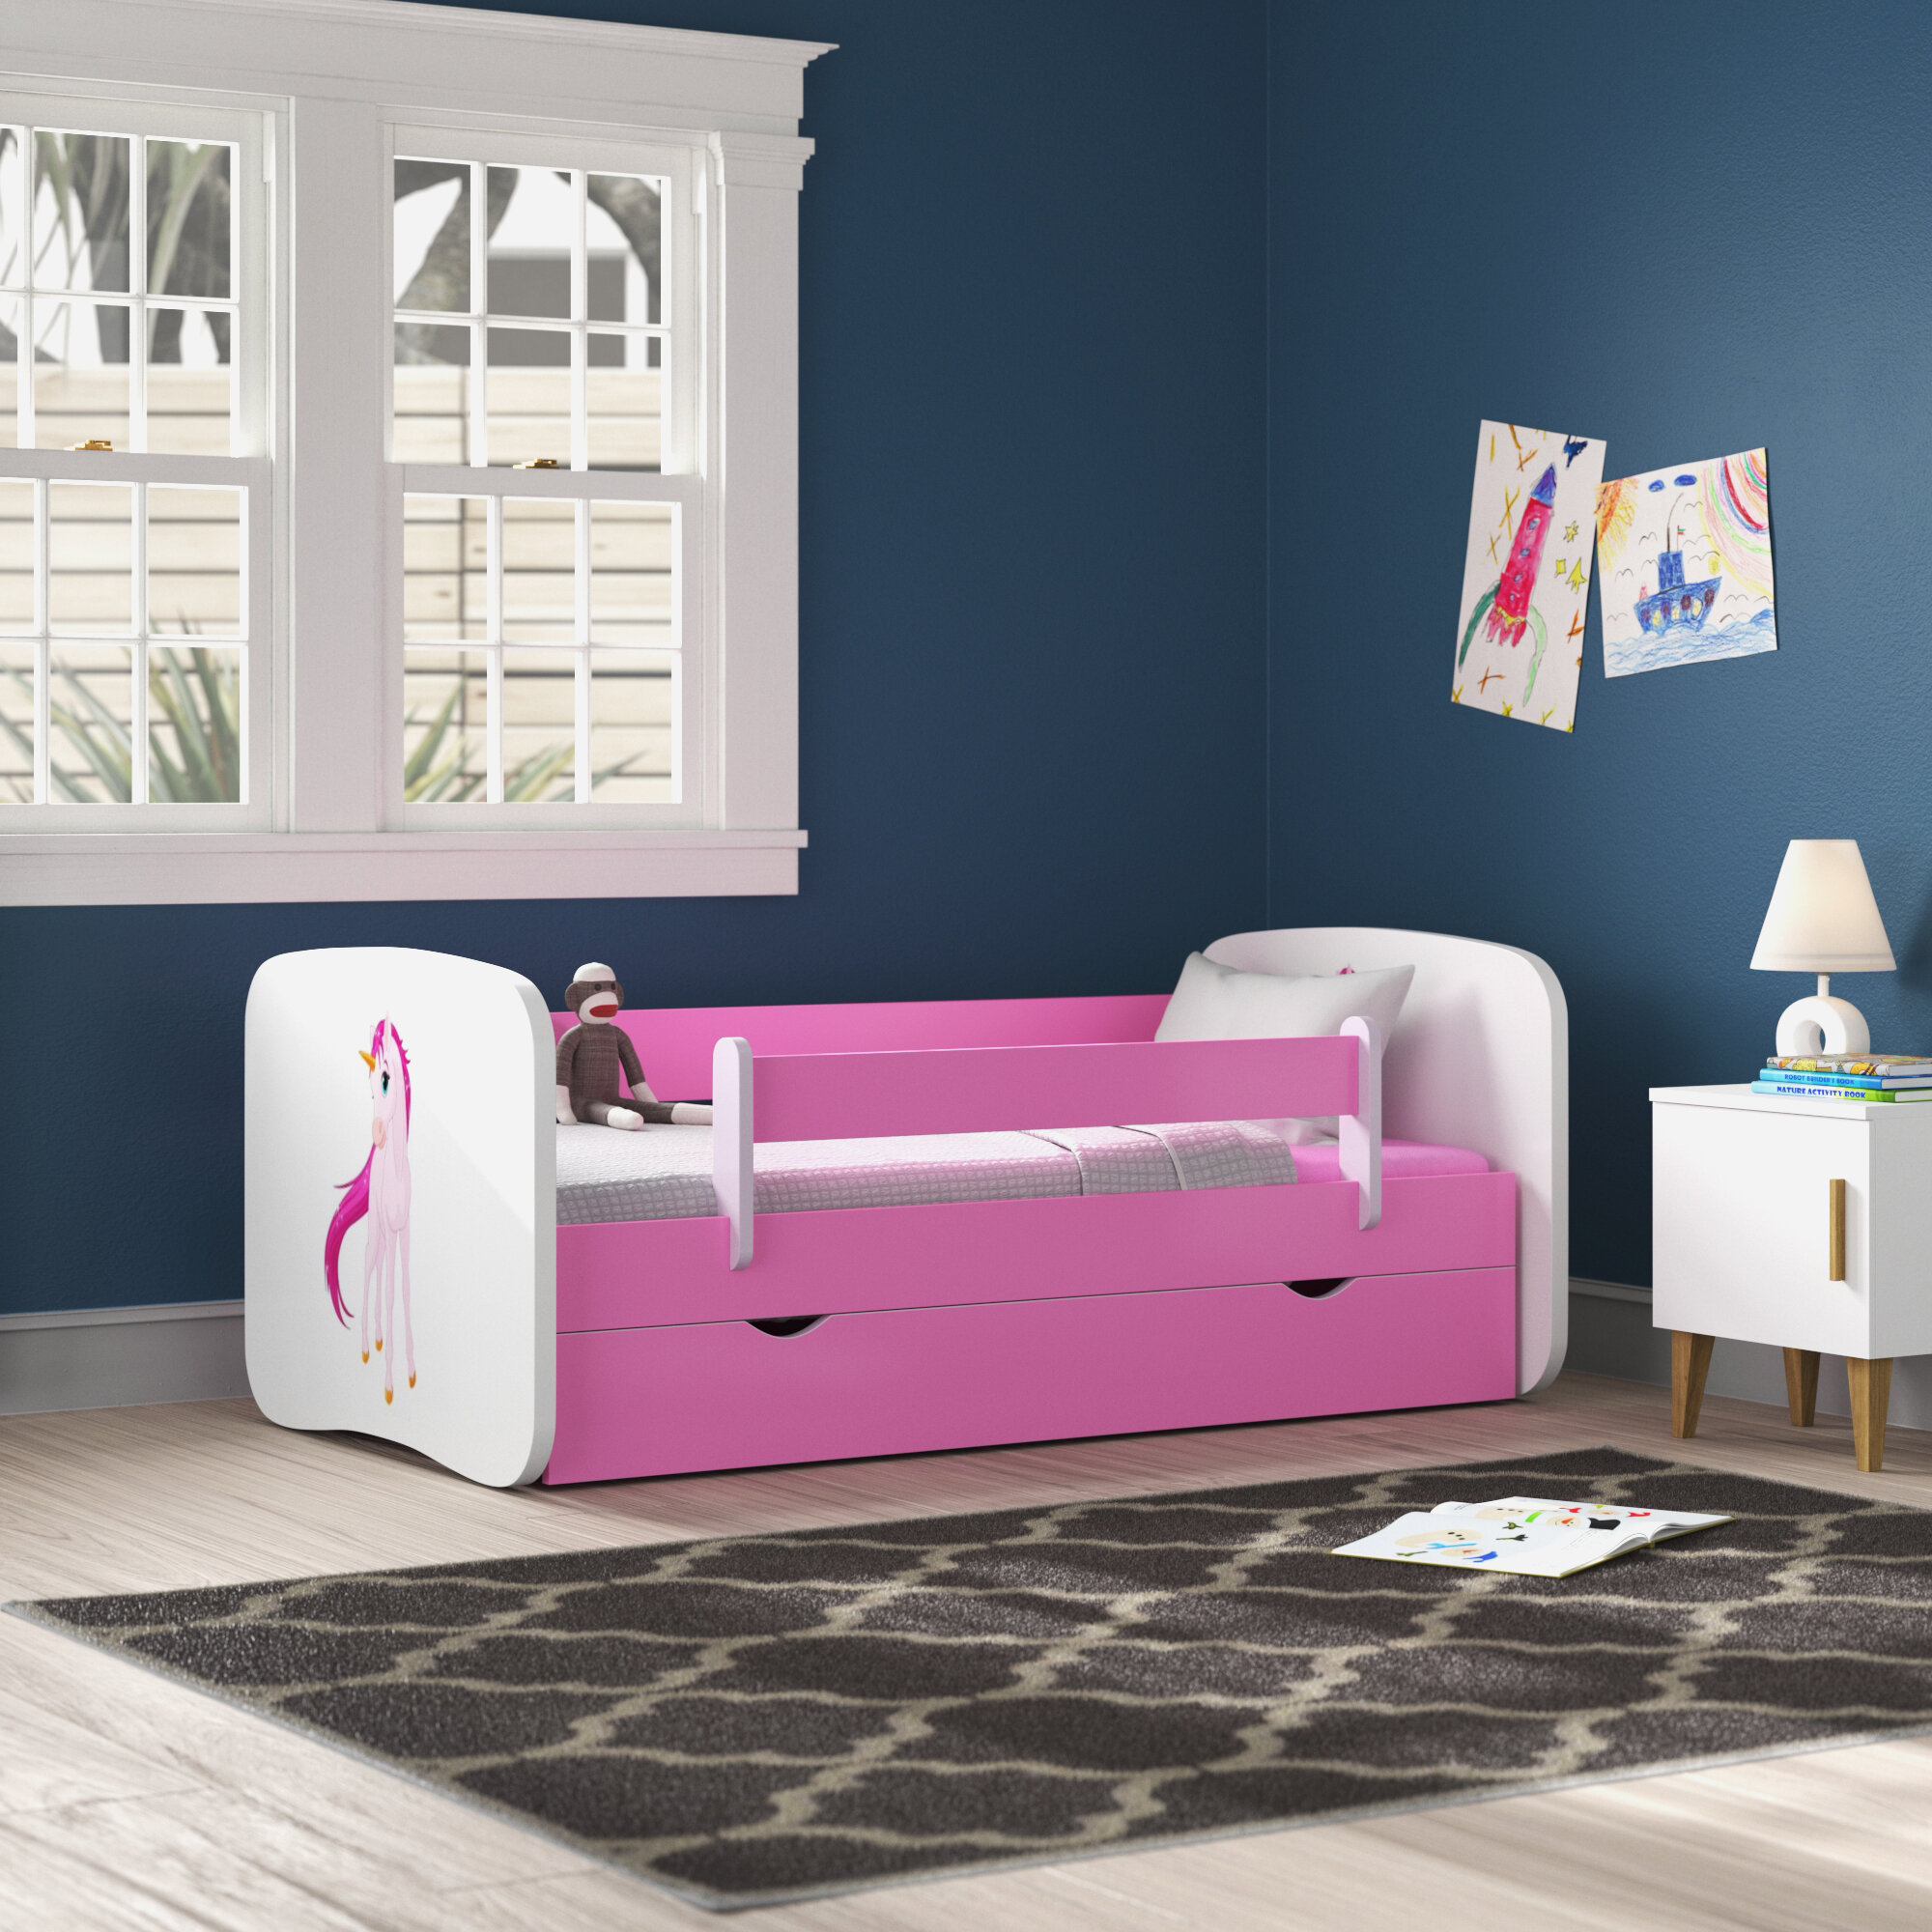 FREE  MATTRESS Toddler Bed Children Bed Kids Bed FREE DELIVERY 140x70 160x80 